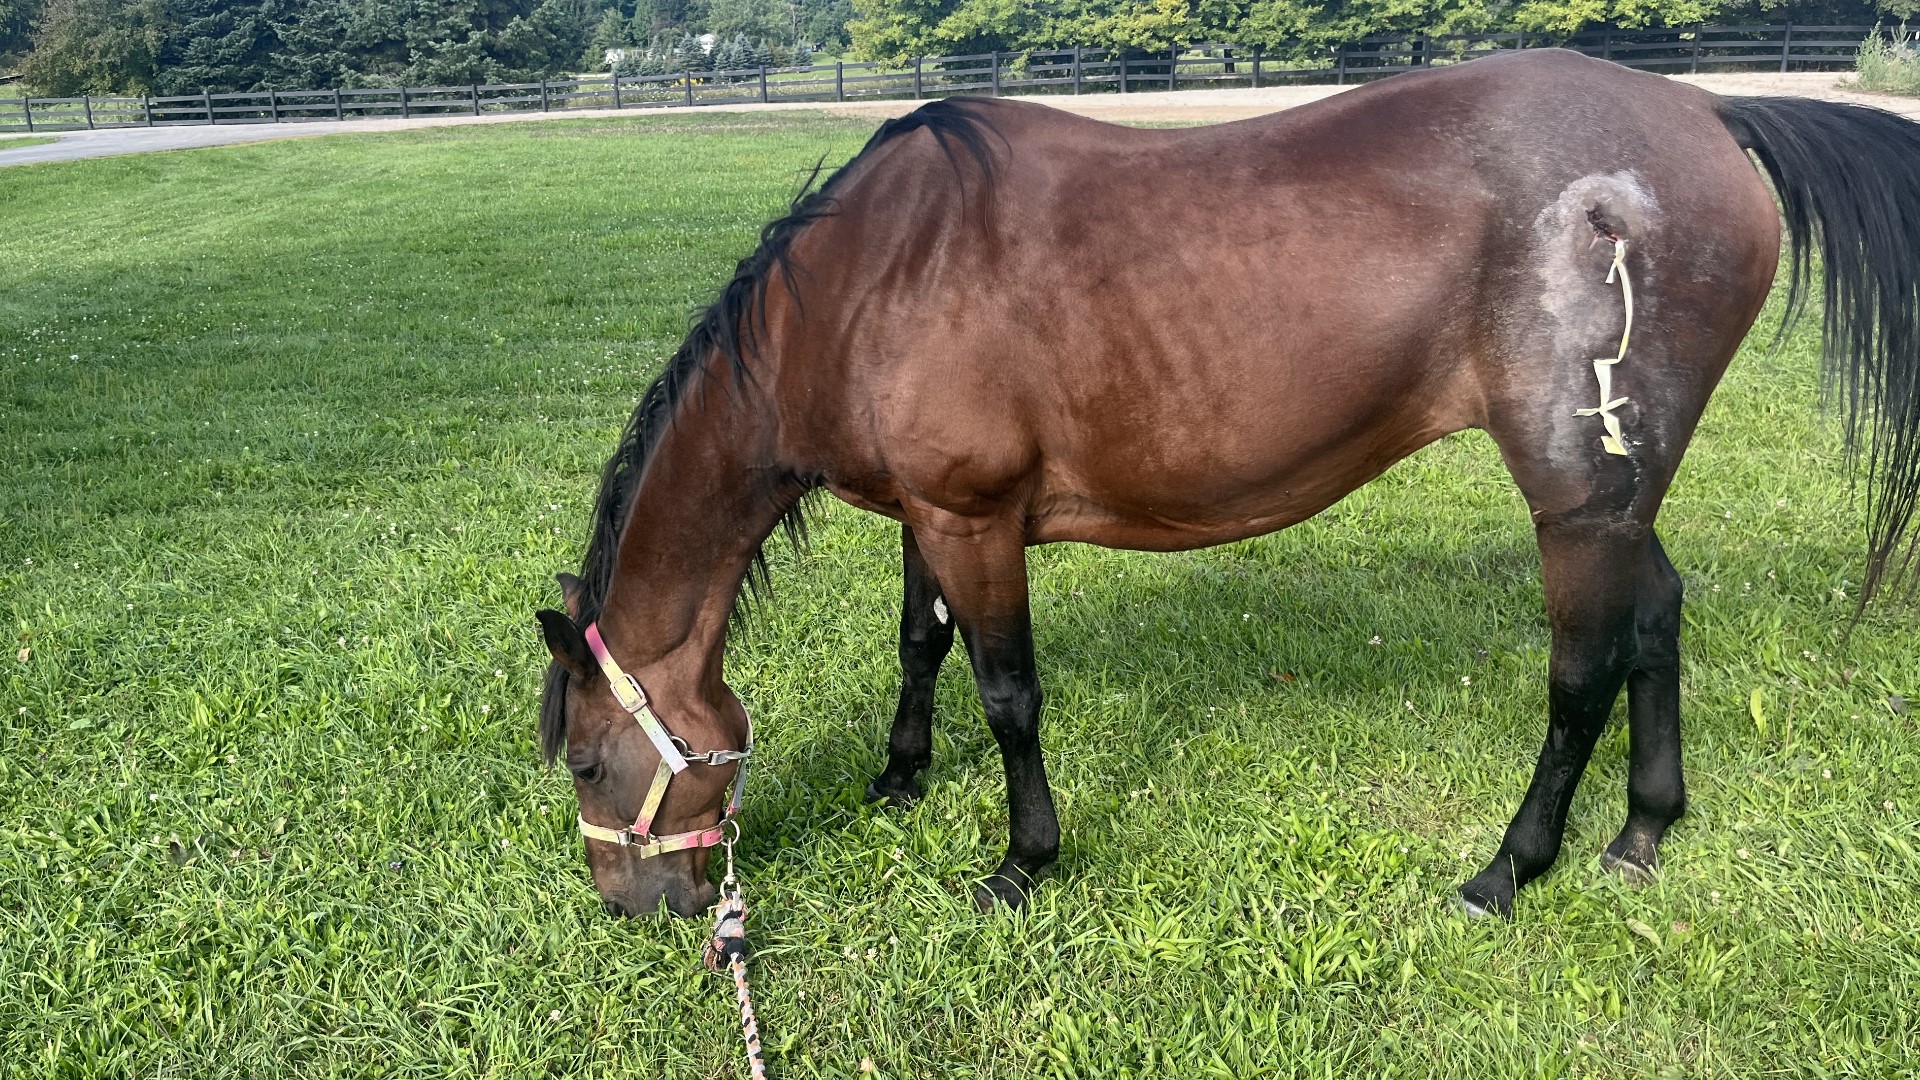 A family from Rockford found their horse, Babe, who escaped from a clinic as she was being treated for puncture wounds four days ago.